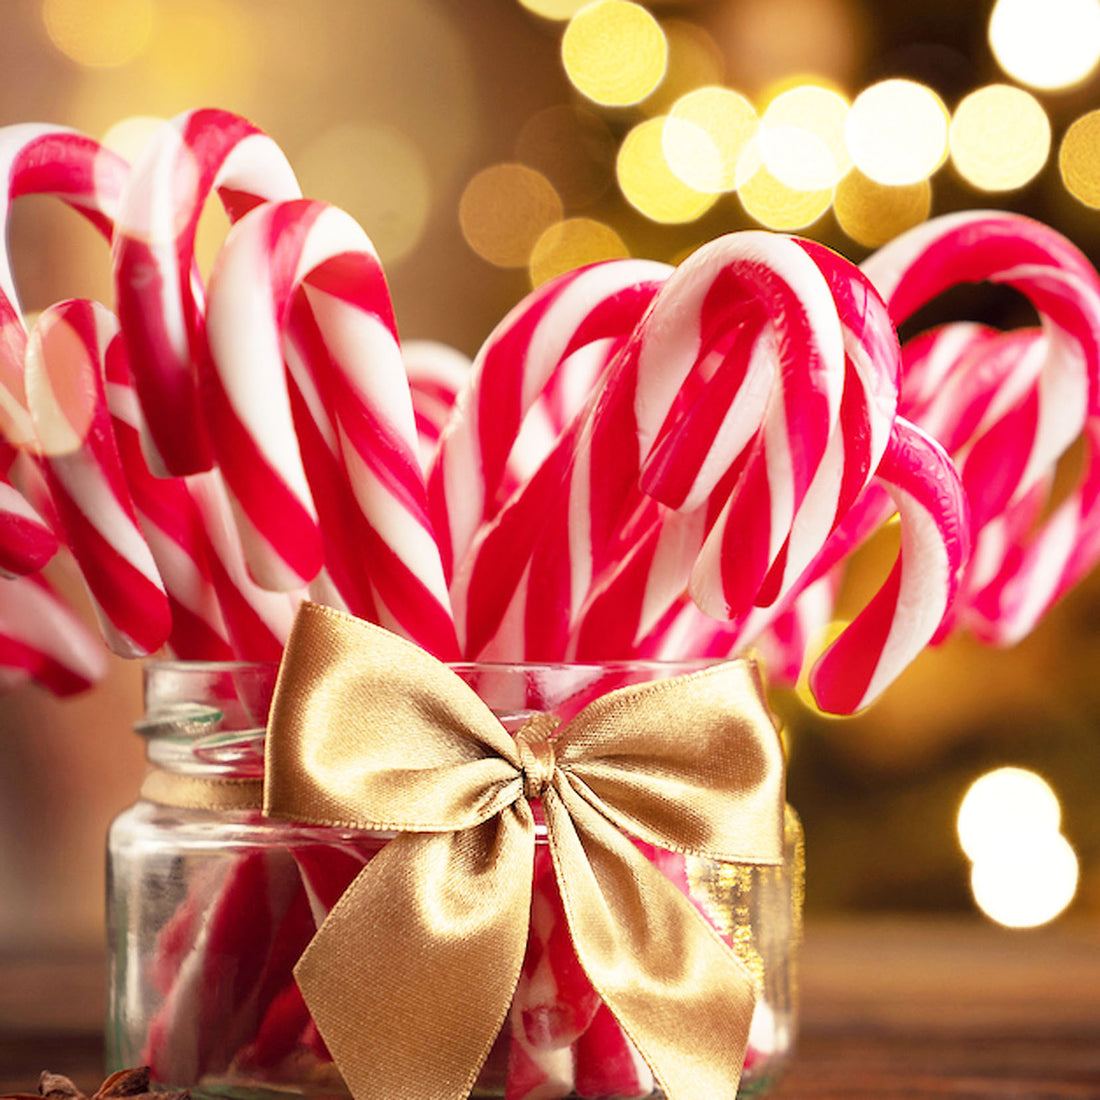 Candy Cane Fragrance Oil | Candle Making | Wax Melts | Cosmetics | CLP ...